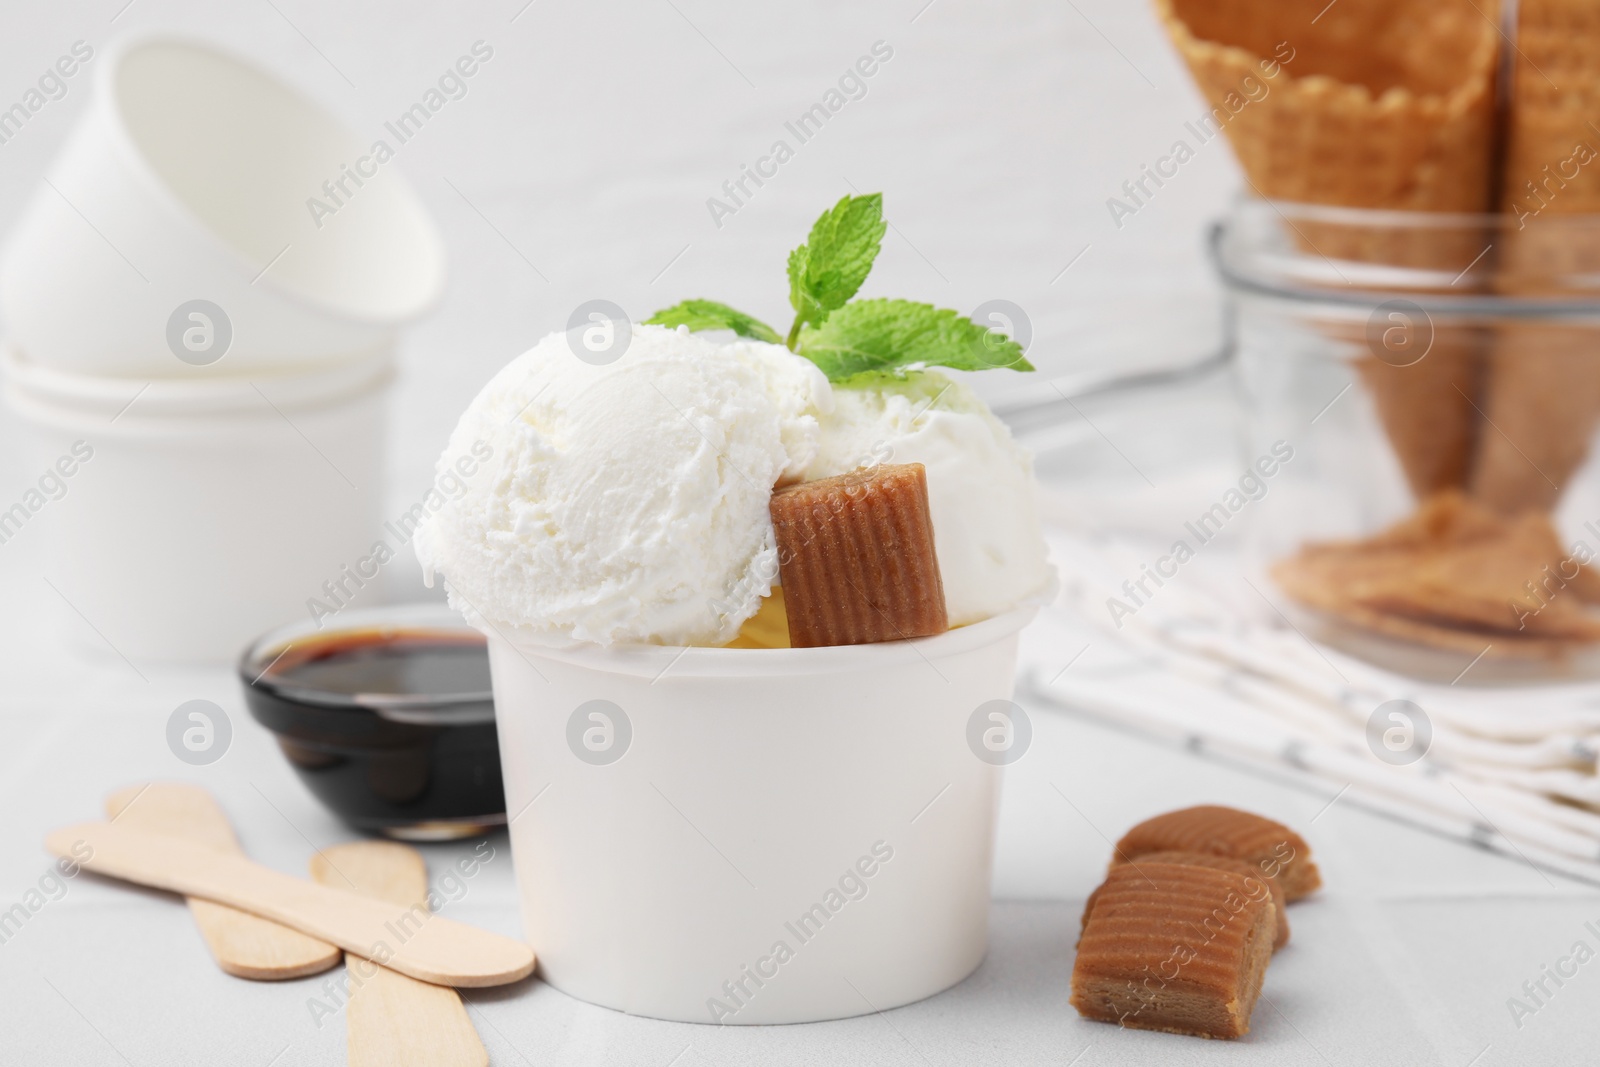 Photo of Scoops of tasty ice cream with caramel candies, sauce and mint leaves on white tiled table, closeup